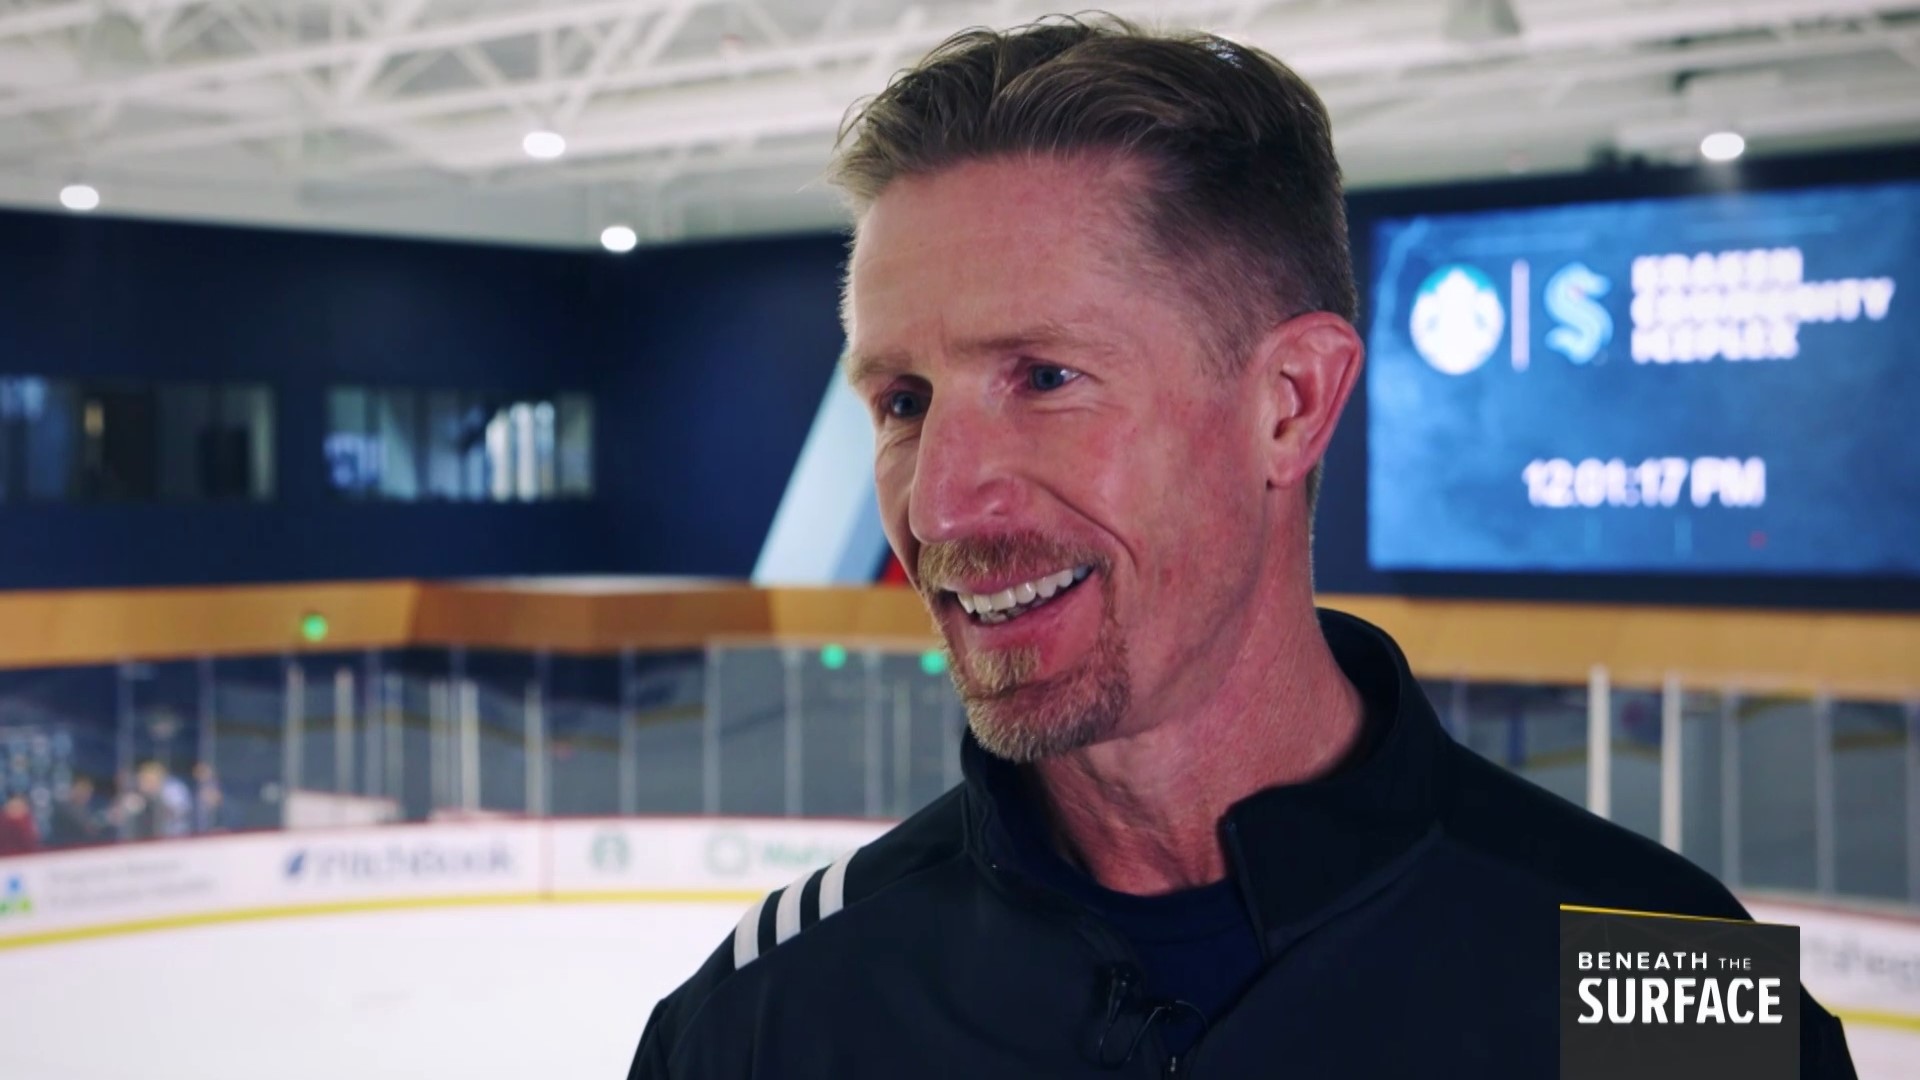 Hakstol loves hockey and is enjoying life in the NHL.